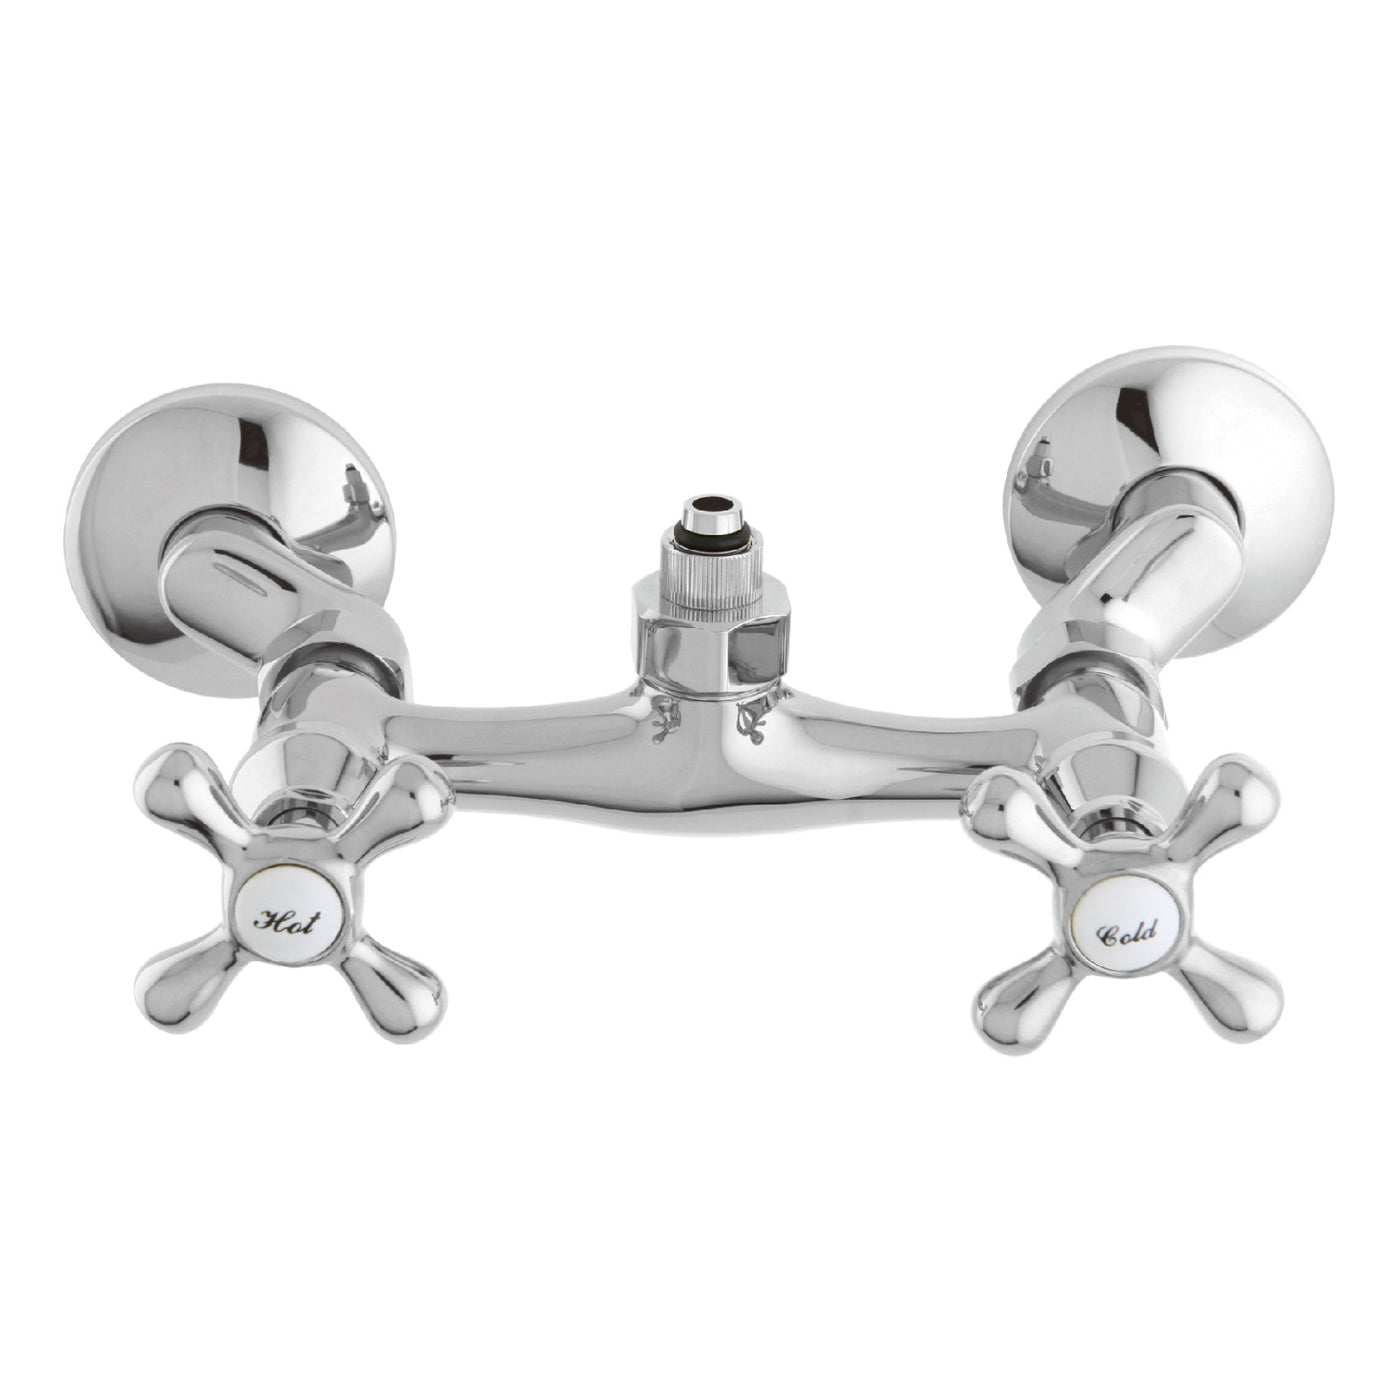 Elements of Design ED2131 Wall Mount Tub Faucet Body with Riser Adapter, Polished Chrome